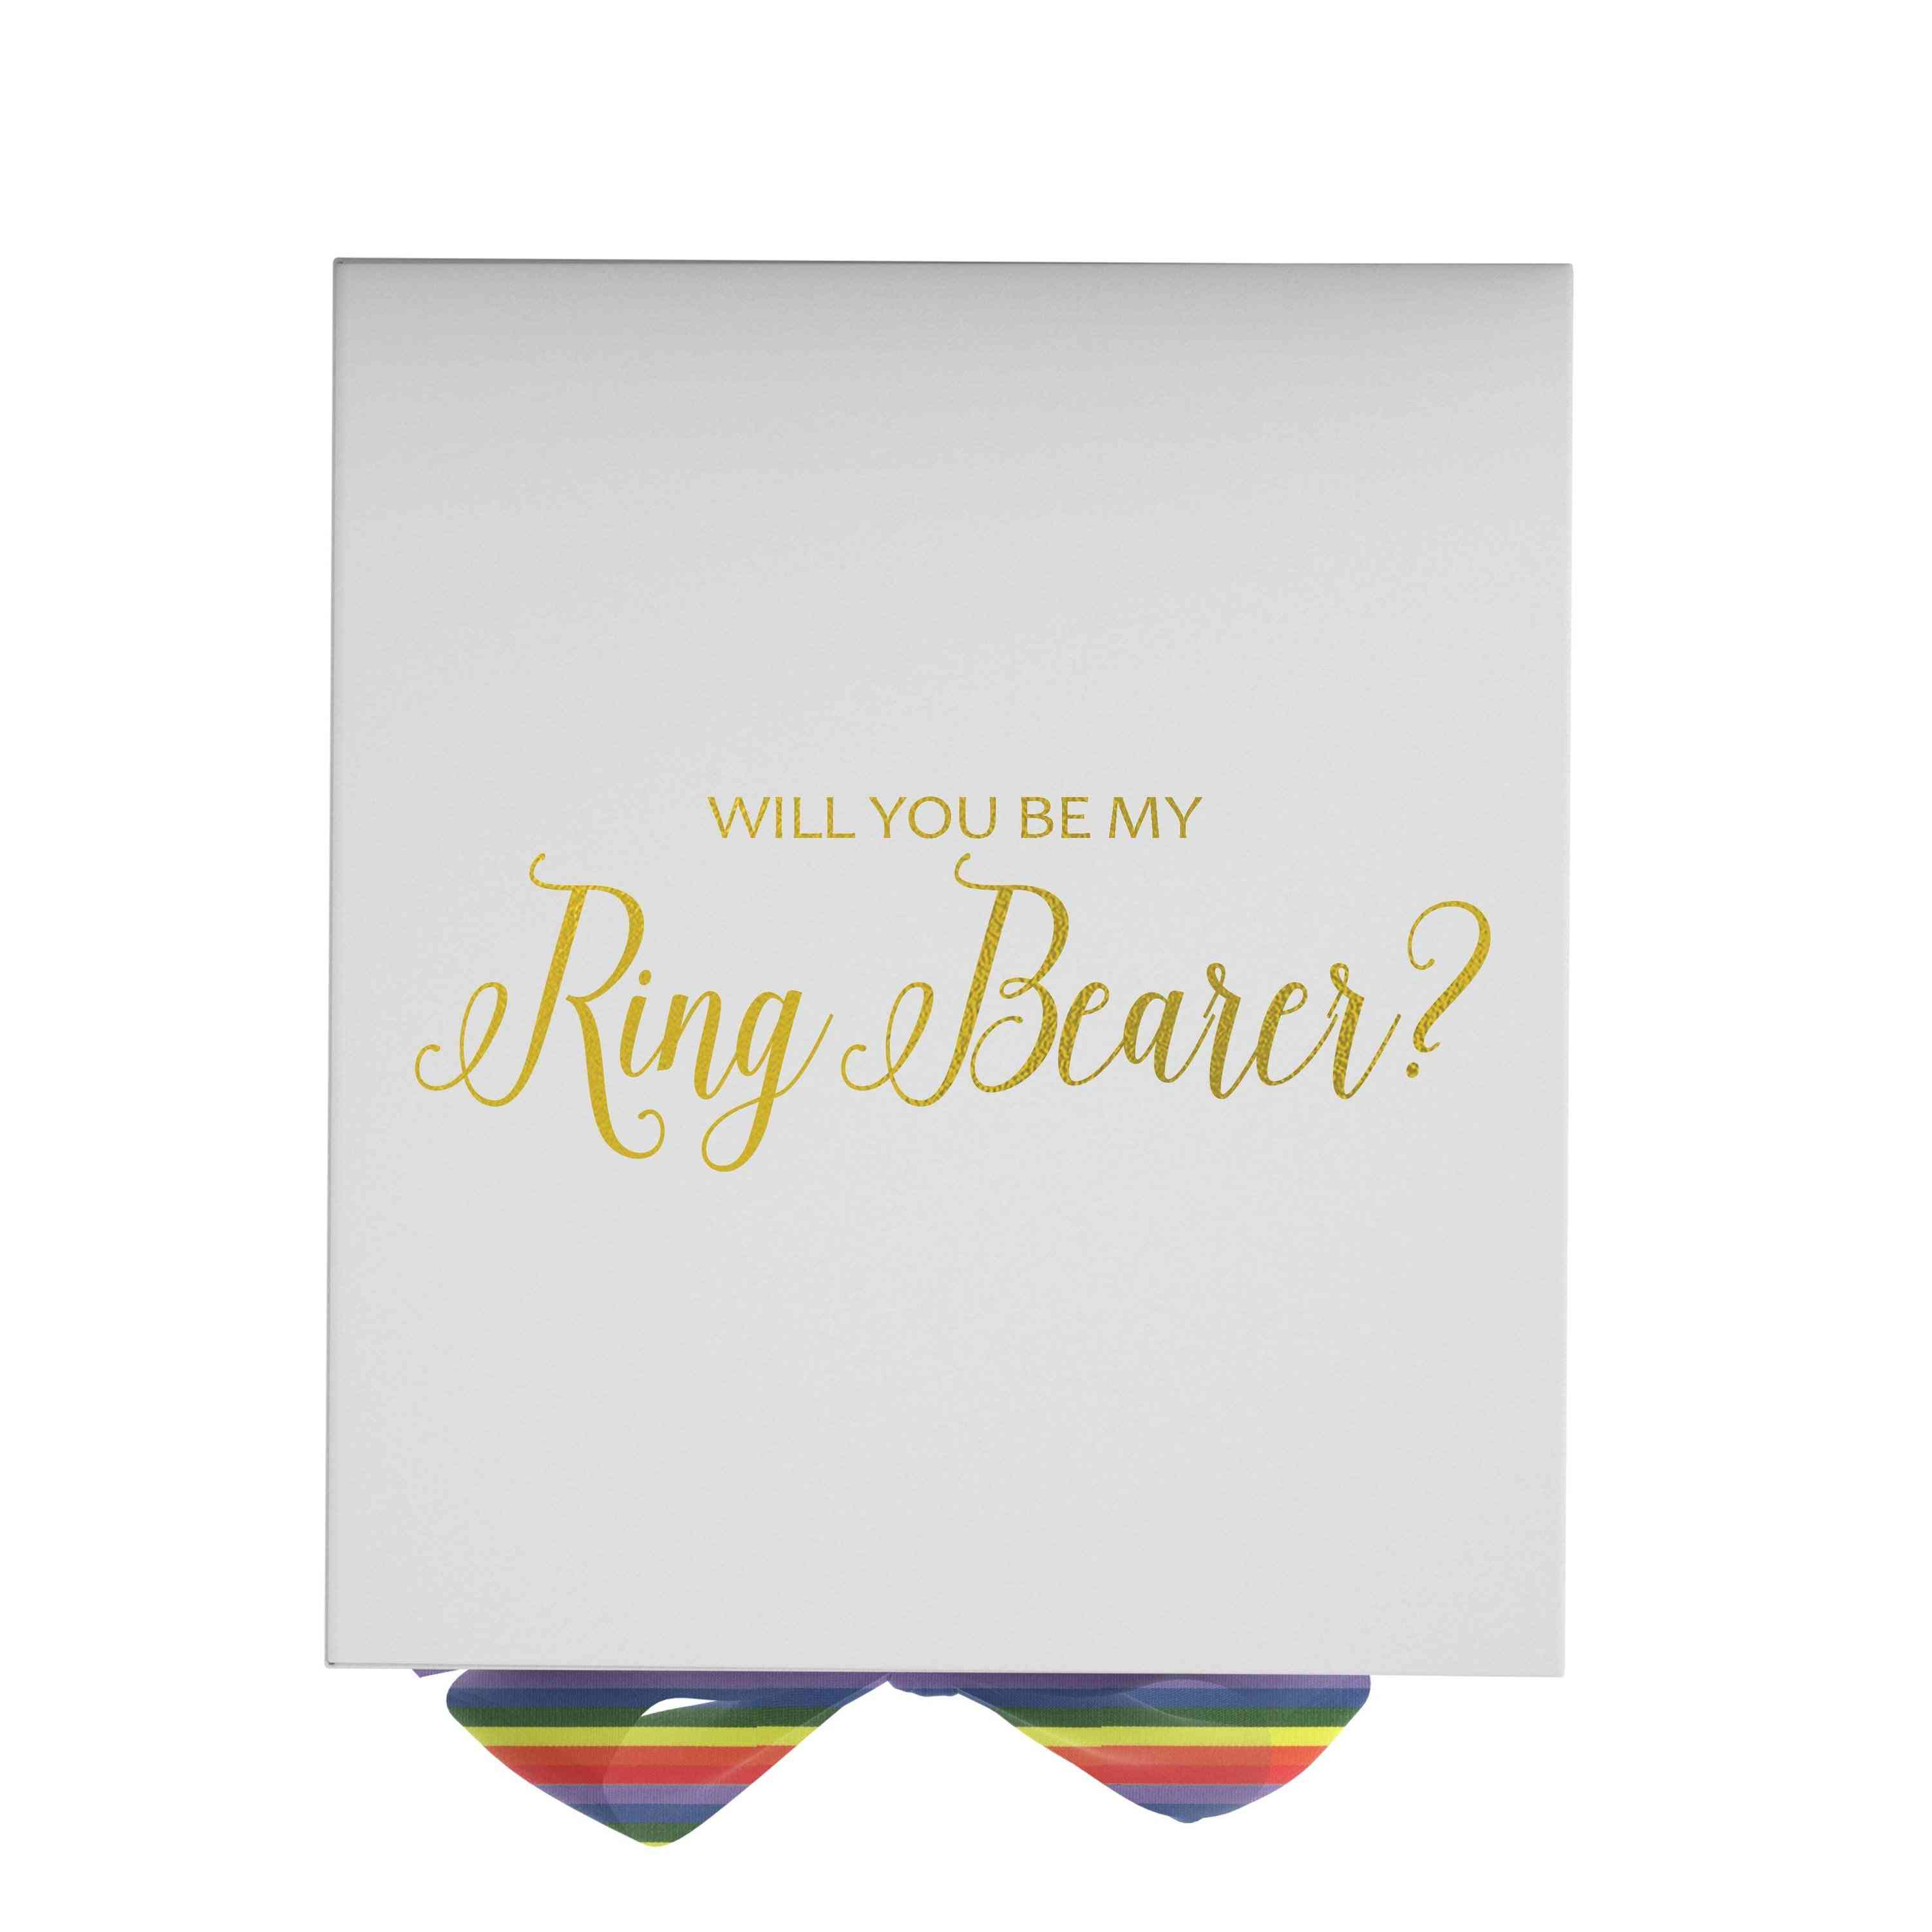 Will You Be My Ring Bearer? Proposal Box White - No Border- Rainbow